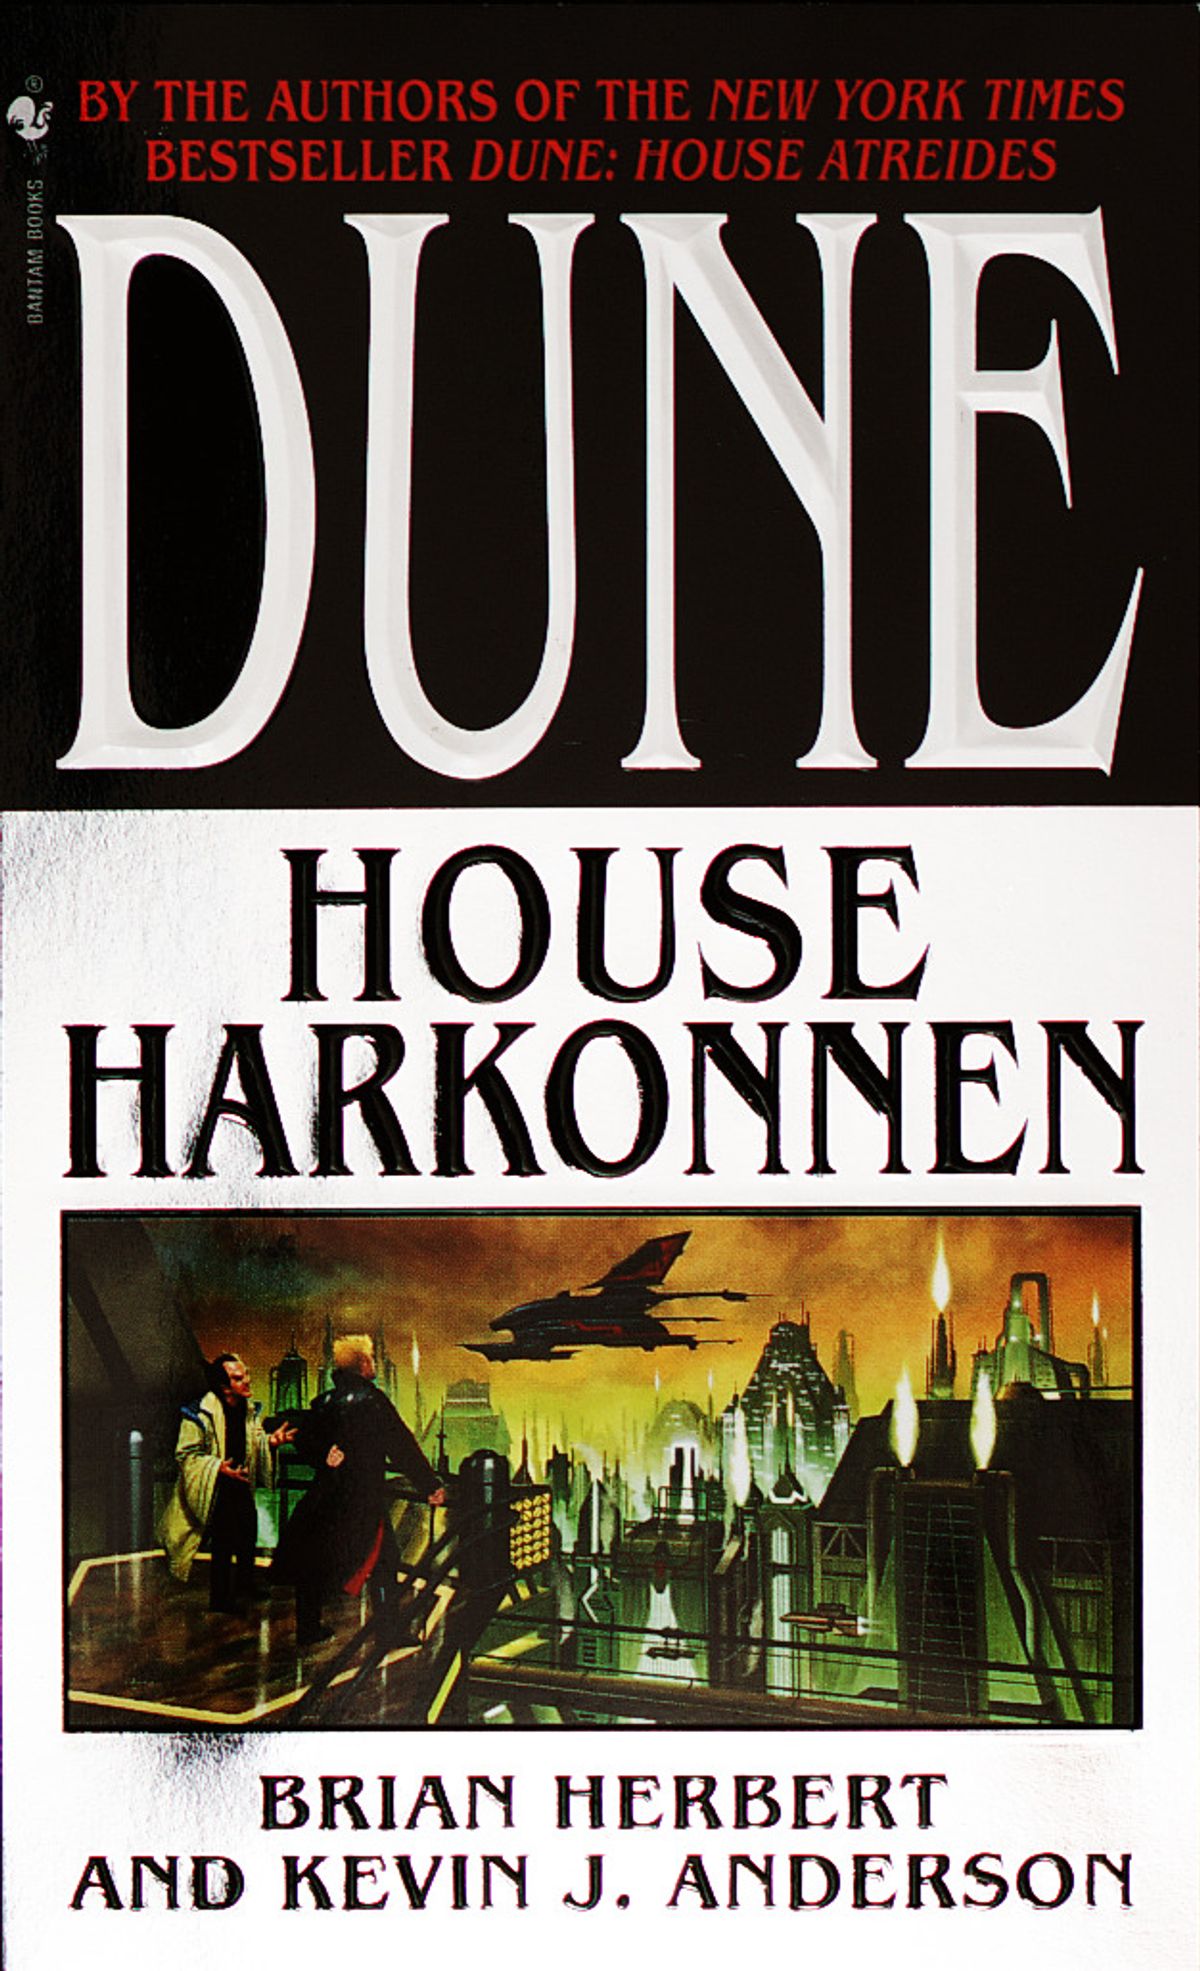 Dune-House-Harkonnen-cover-Brian-Herbert-and-Kevin-J.-Anderson